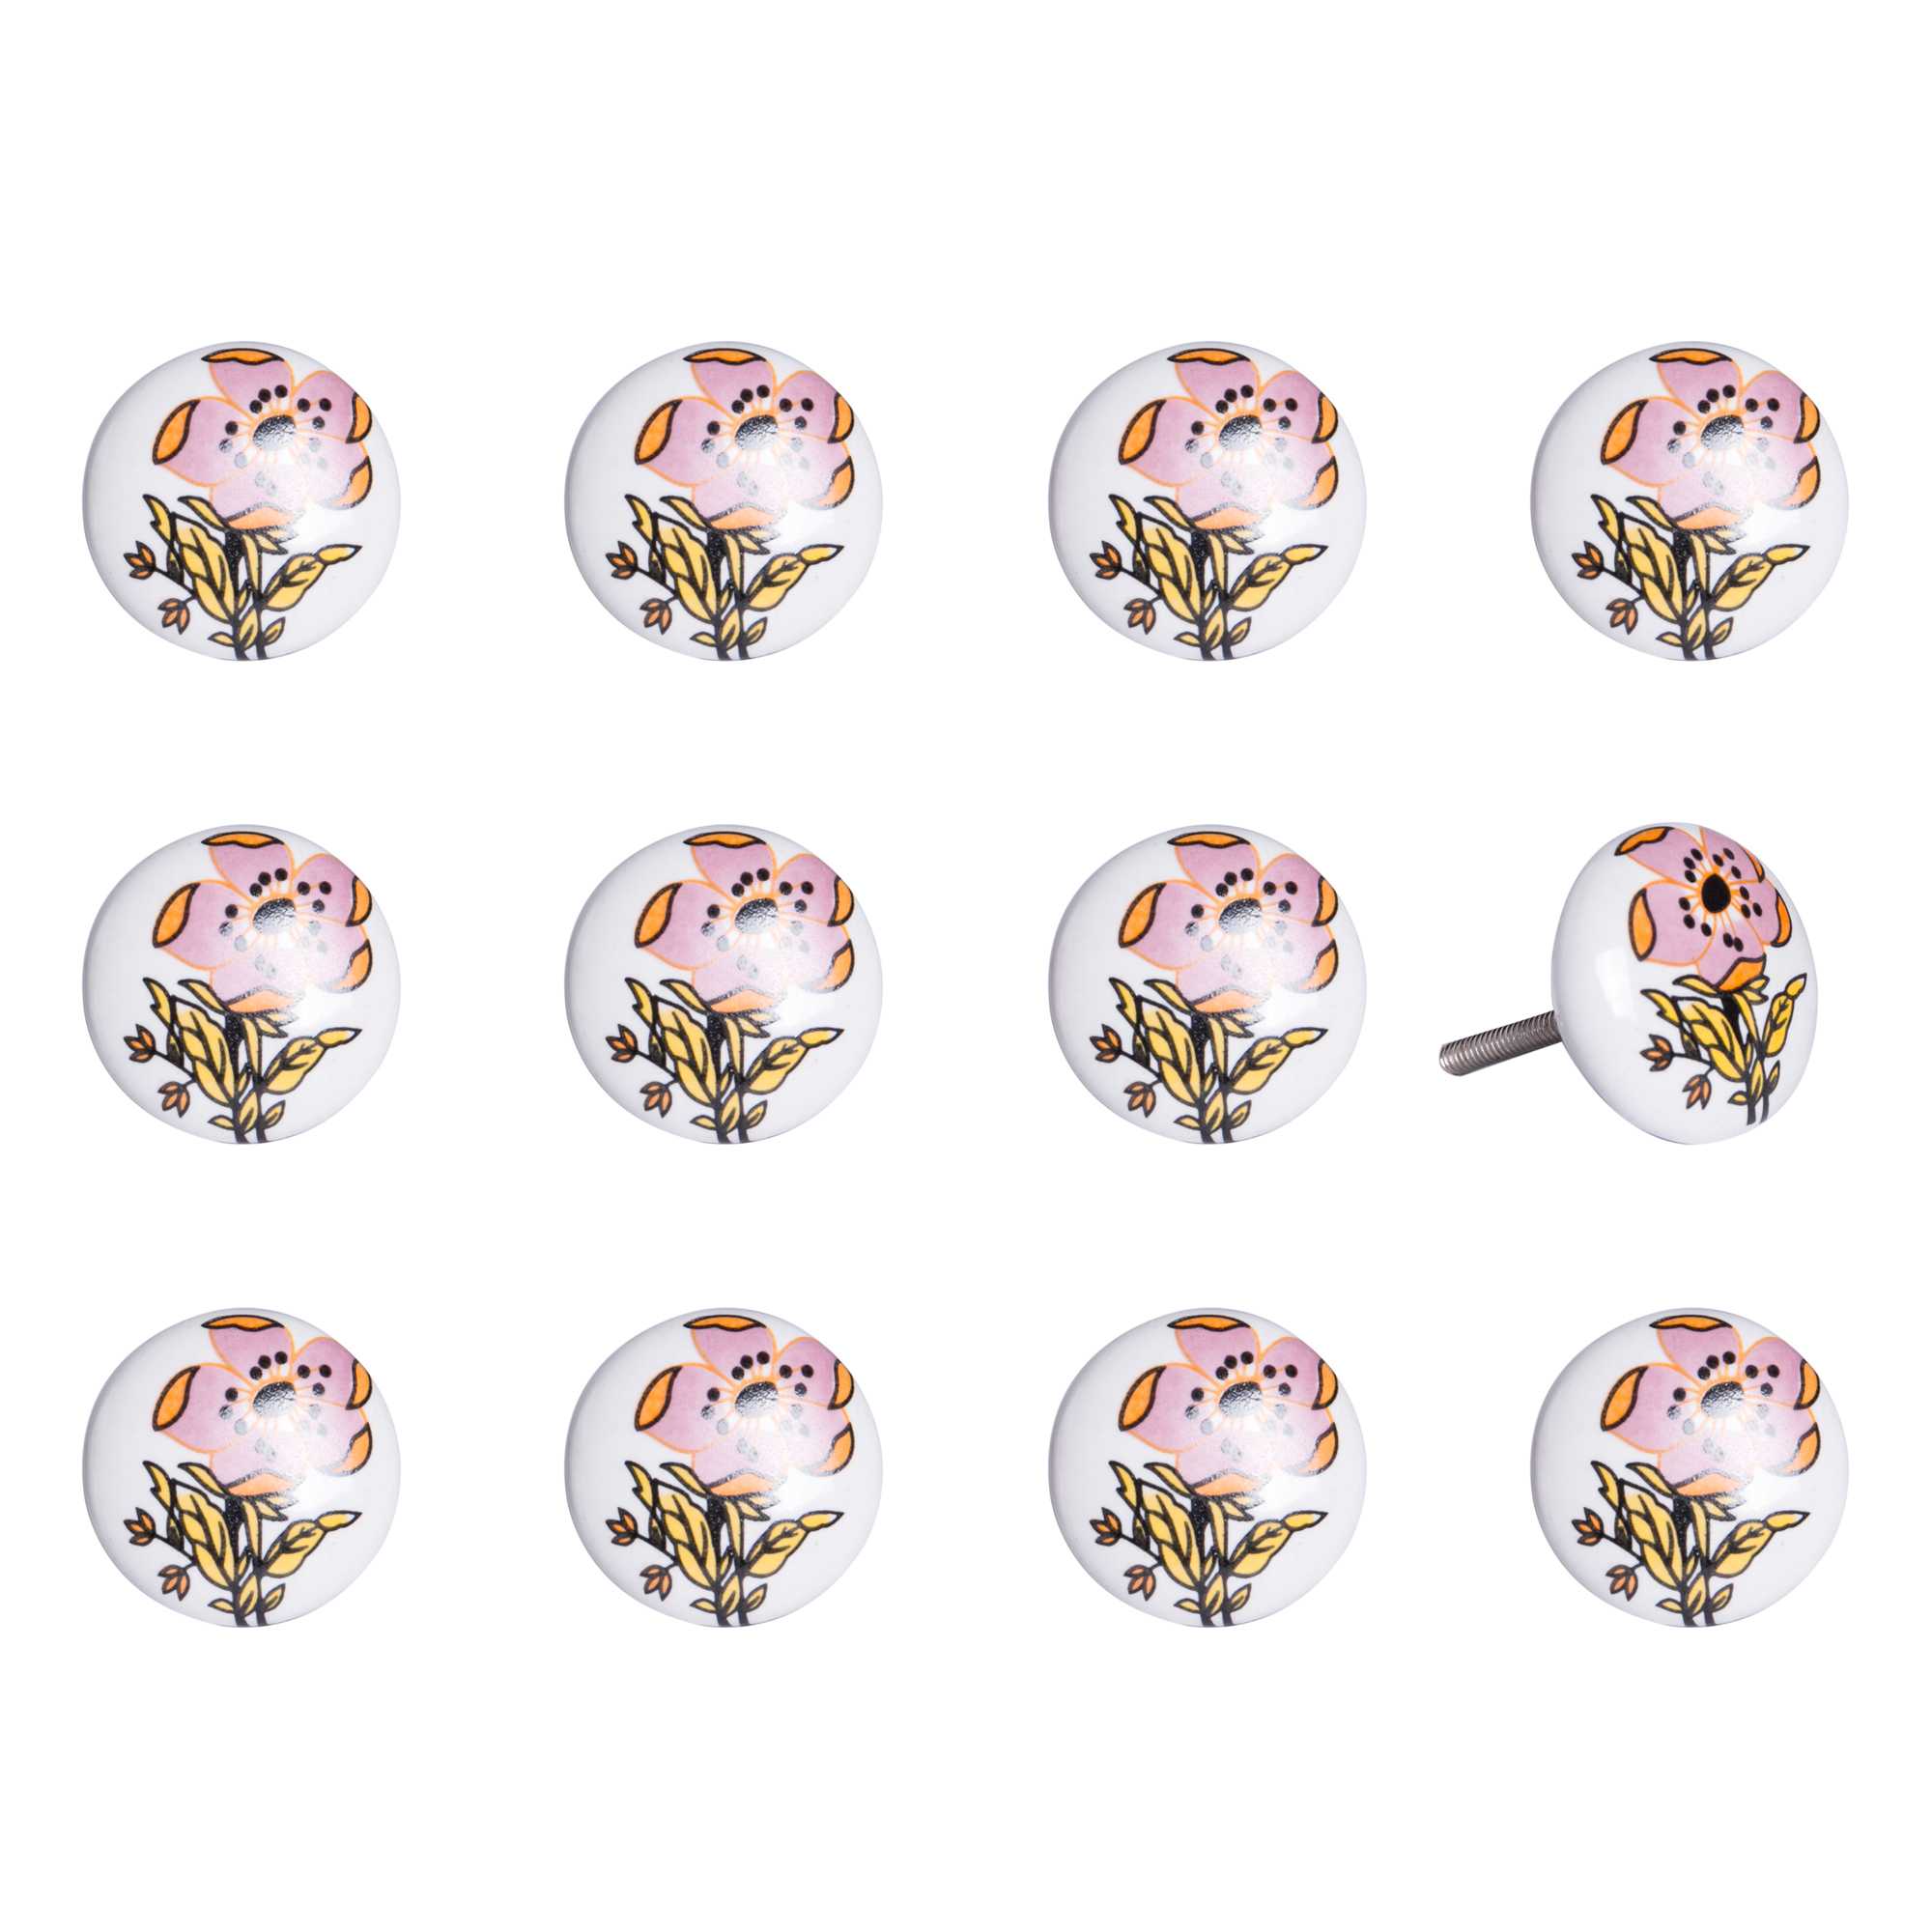 1.5" x 1.5" x 1.5" White, Yellow and Pink - Knobs 12-Pack